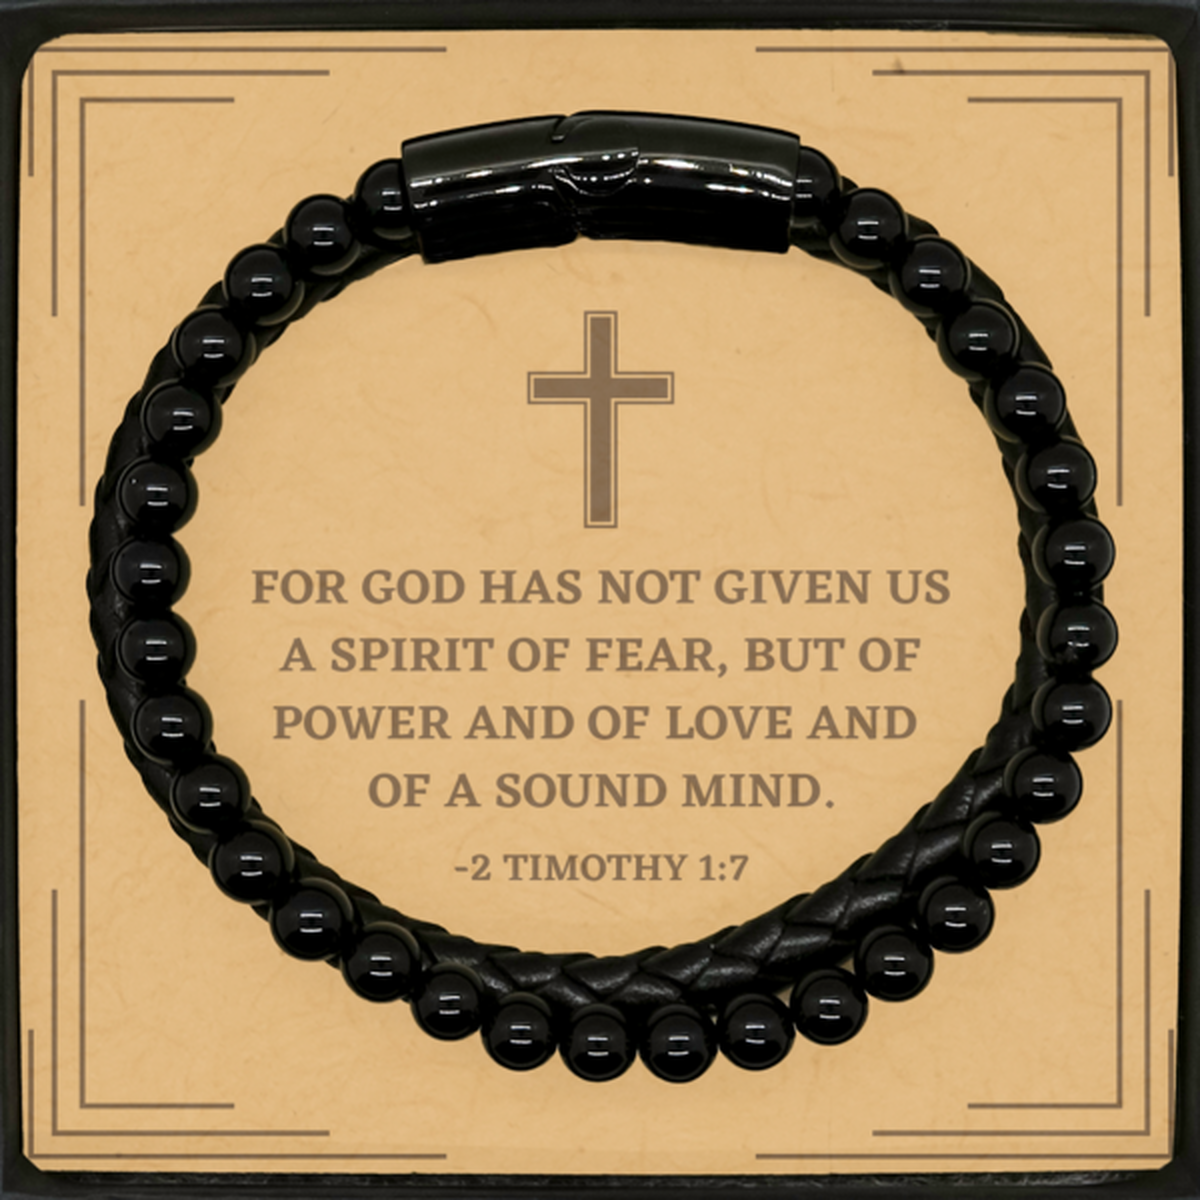 Baptism Gifts For Teenage Boys Girls, Christian Bible Verse Stone Leather Bracelet, For God has not given us, Confirmation Gifts, Bible Verse Card for Son, Godson, Grandson